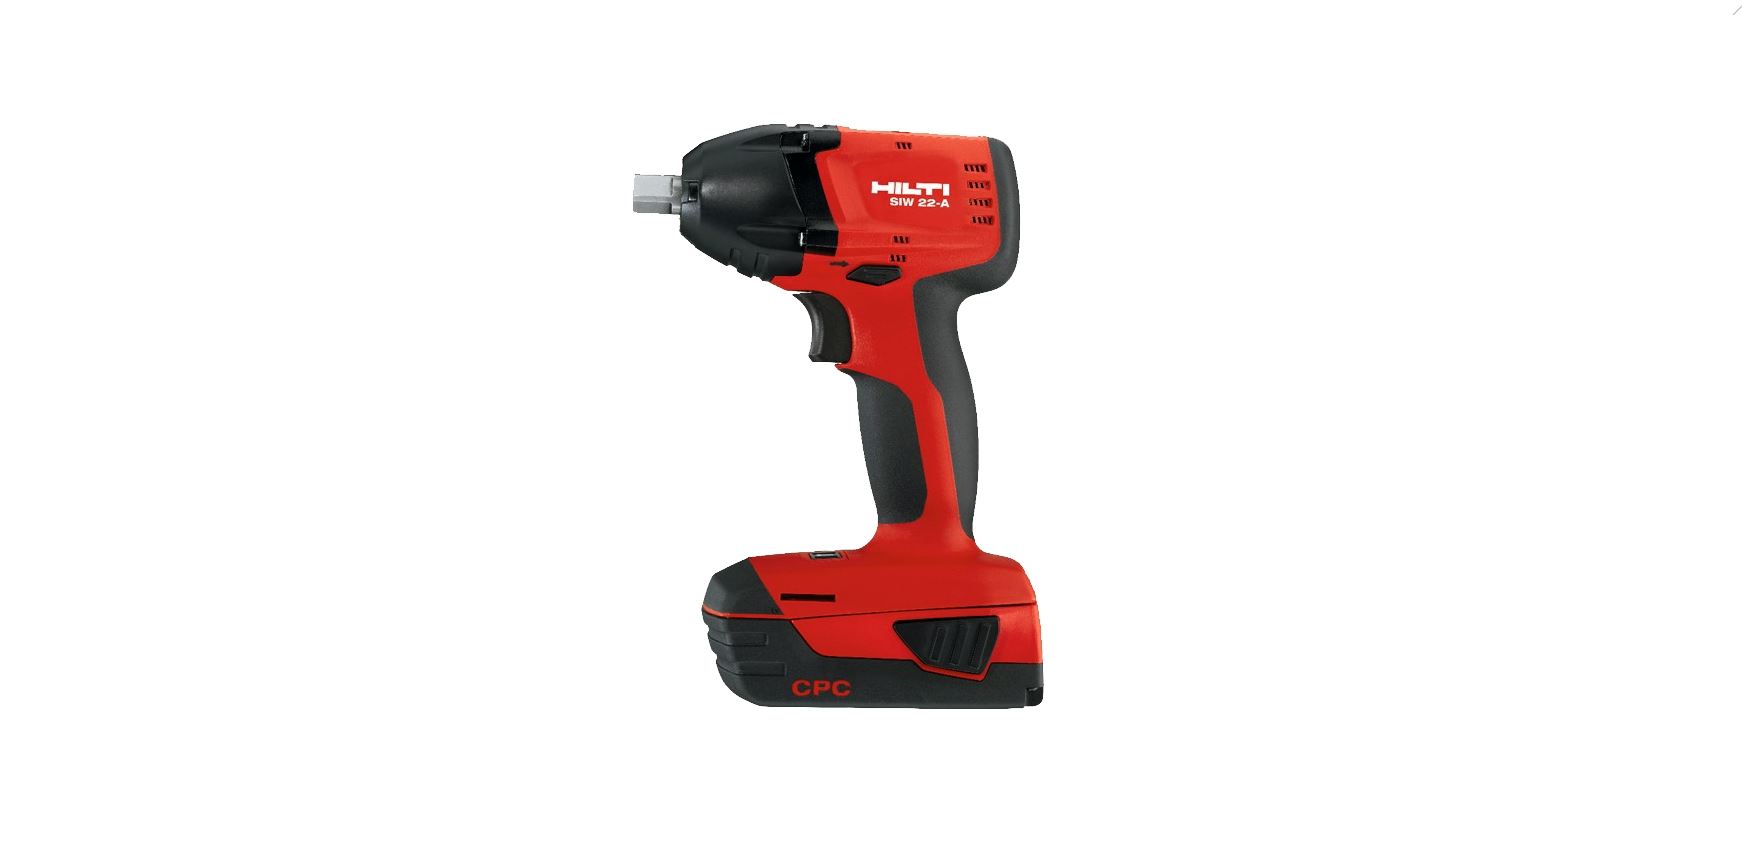 Hilti cordless impact wrench rating, specifications